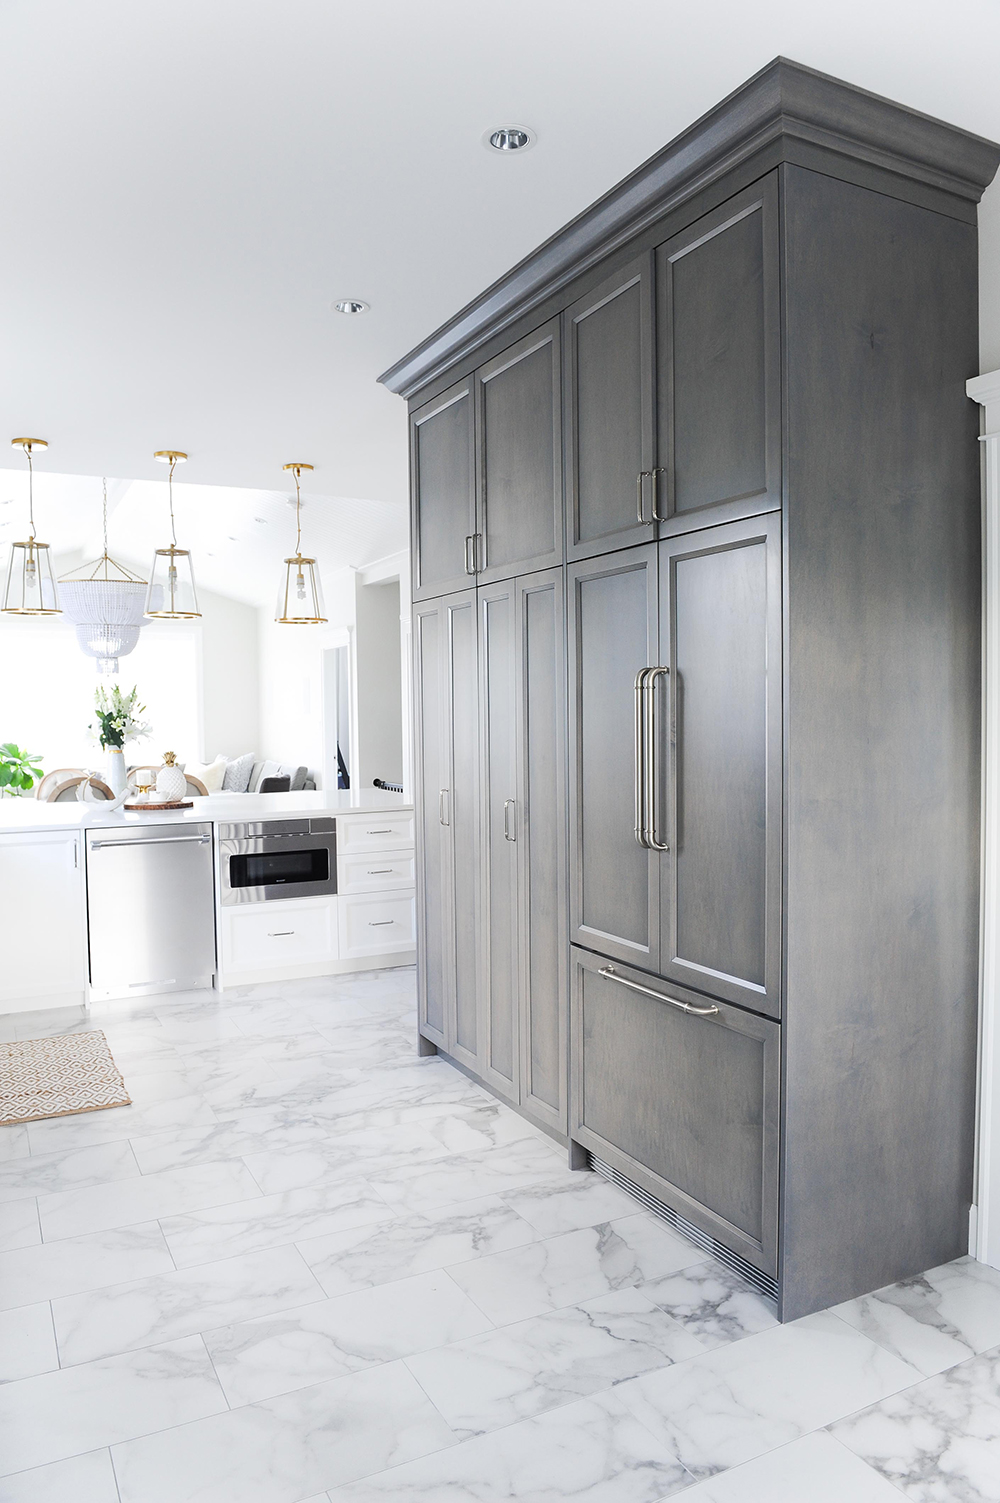 A neutral kitchen featuring a functional floor-to-ceiling cabinetry unit.